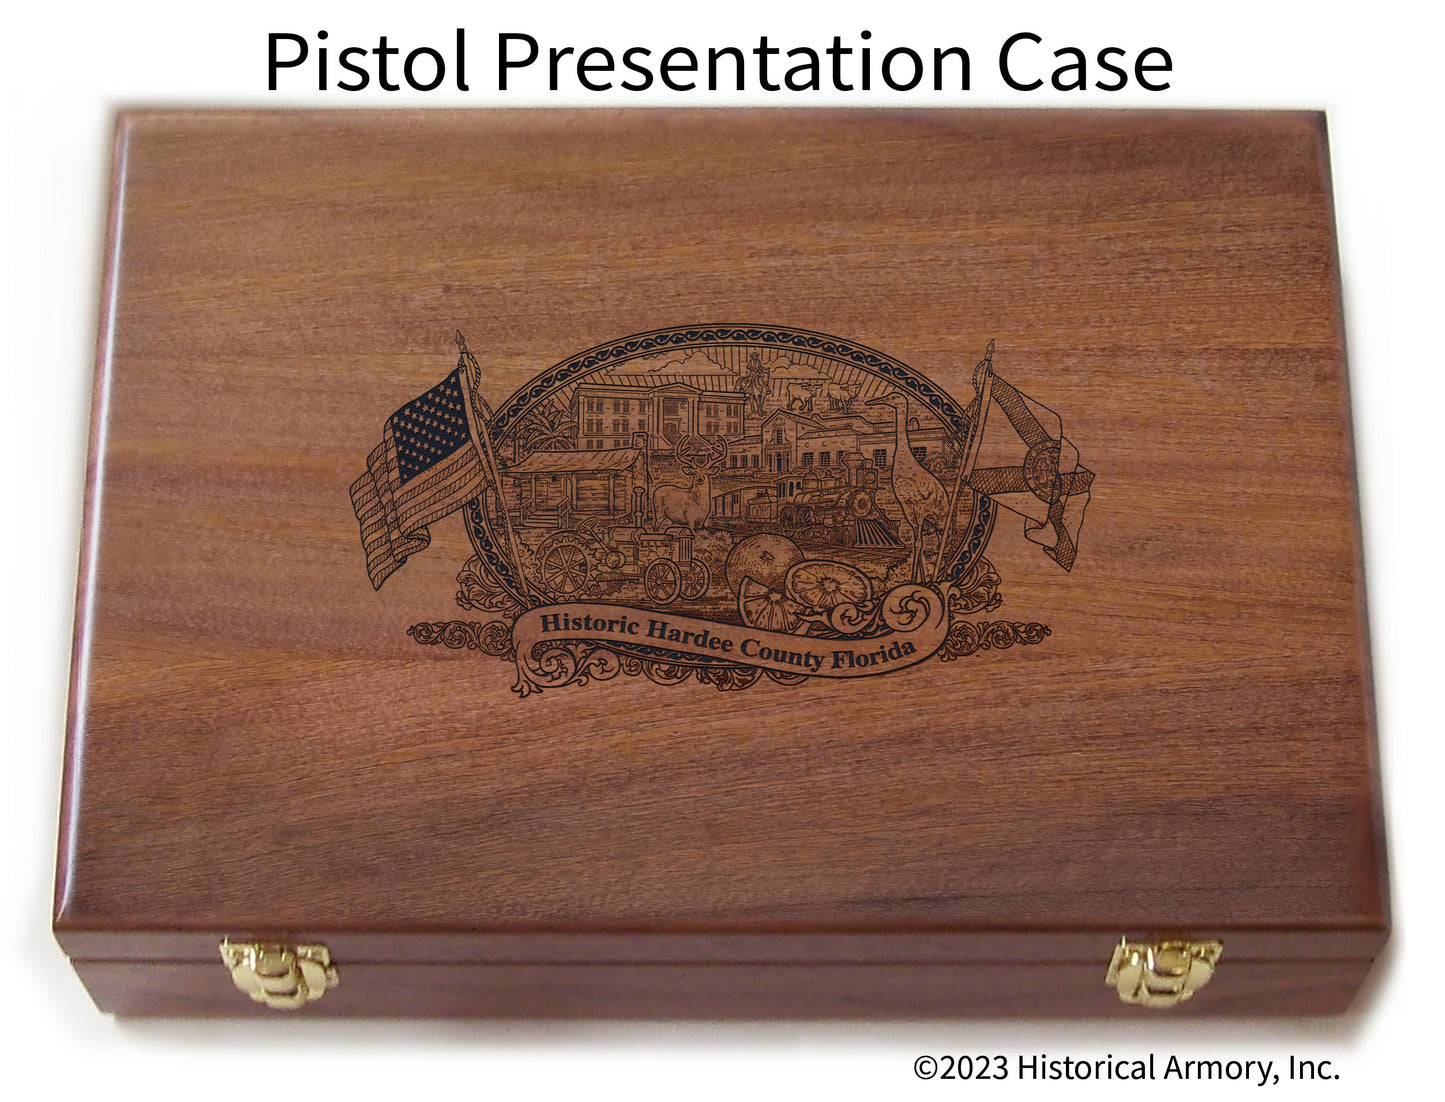 Hardee County Florida Engraved .45 Auto Ruger 1911 Presentation Case